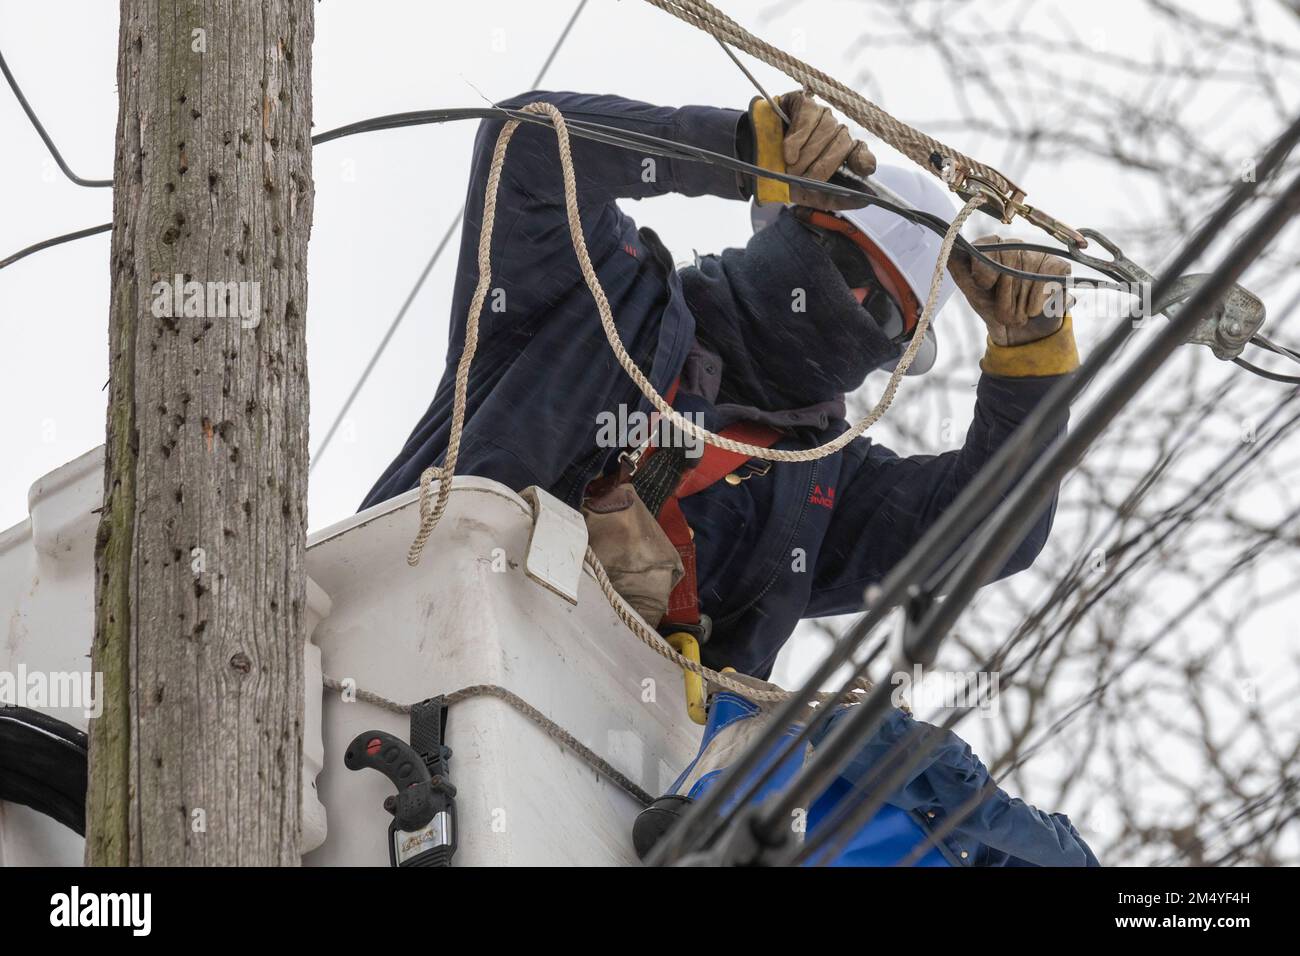 Detroit, Michigan, USA. 23rd Dec, 2022. DTE Energy workers repair a power line taken down by a falling tree during a winter storm. The storm brought dangerous cold, snow, and wind to much of the United States. The storm left about 1.3 million customers without power across the country. Credit: Jim West/Alamy Live News Stock Photo